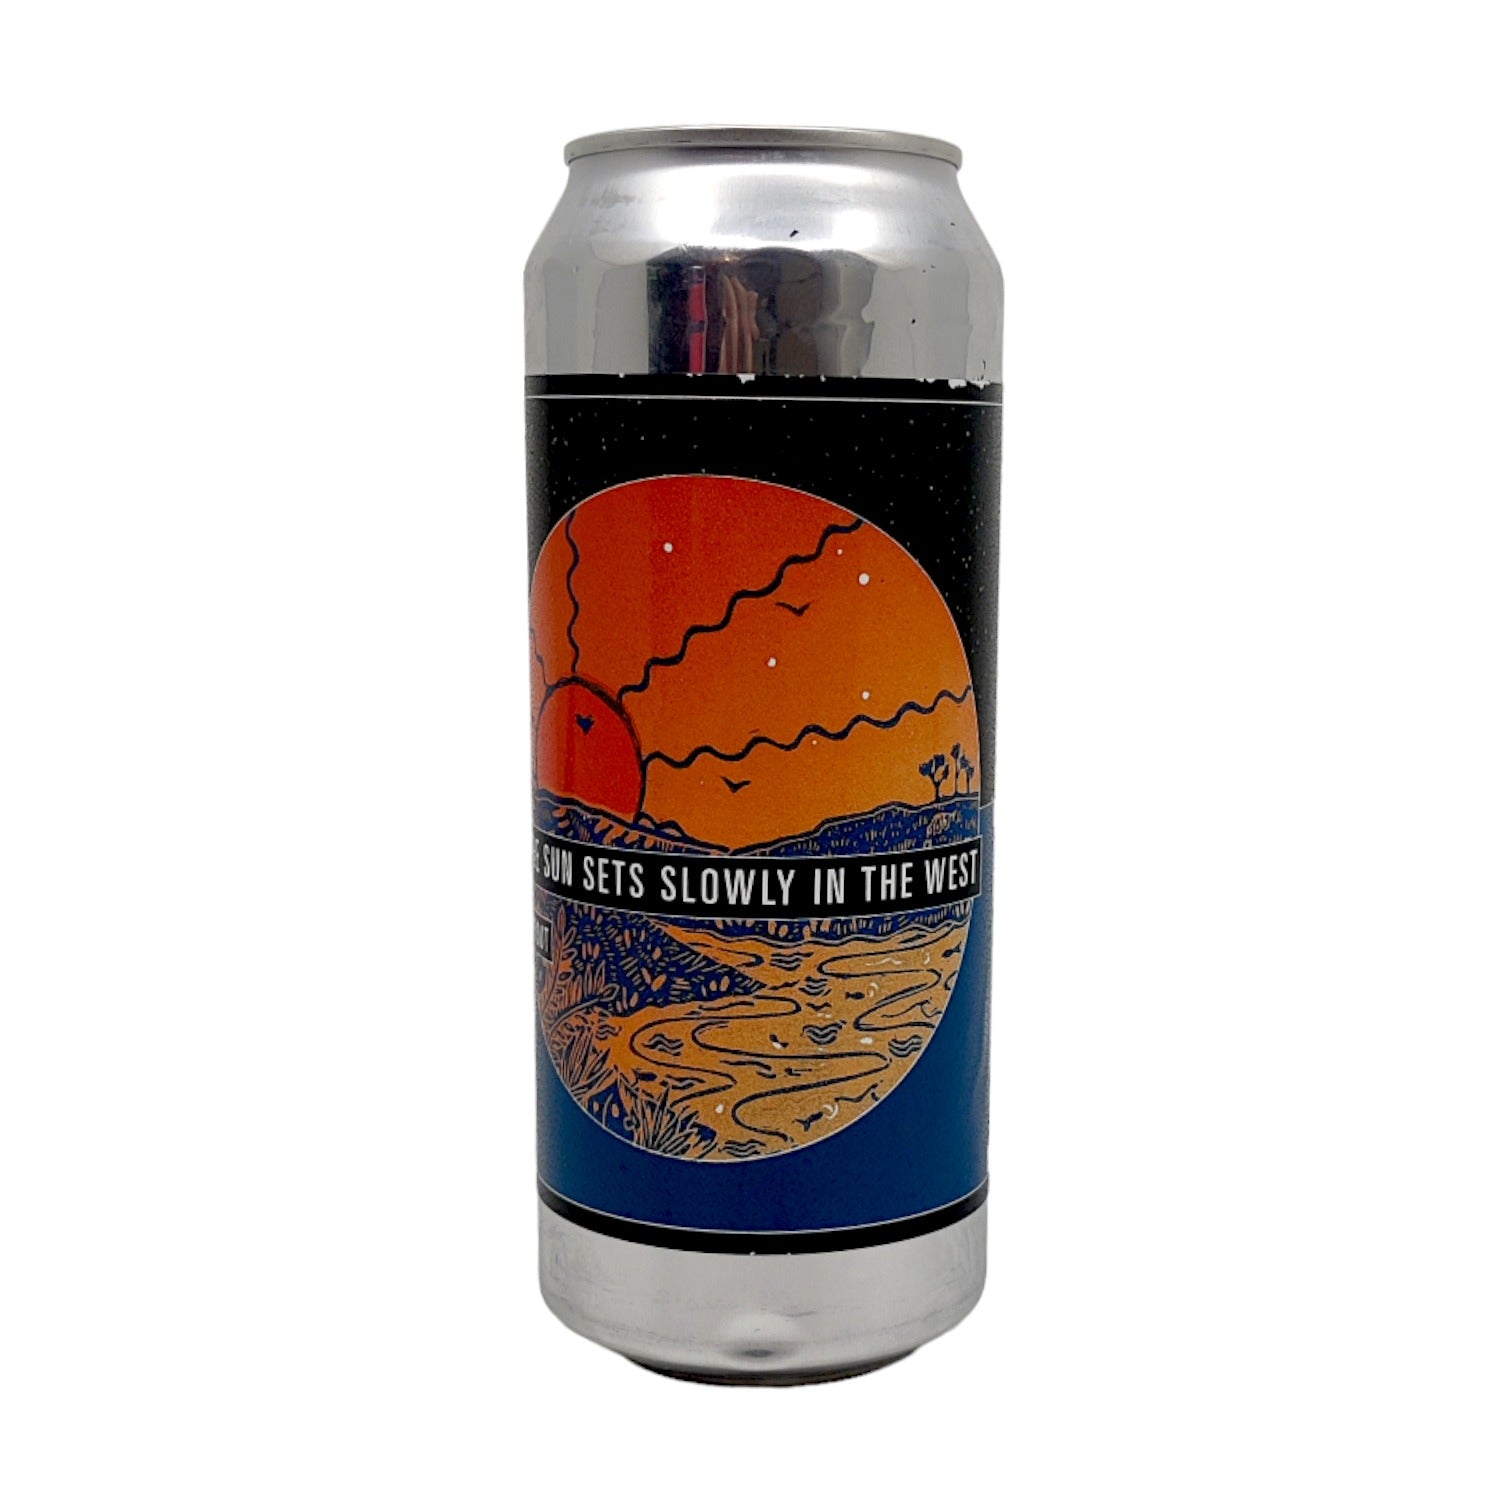 Makemake As The Sun Sets Slowly In the West Chai Stout 8% (500ml can-Hop Burns & Black